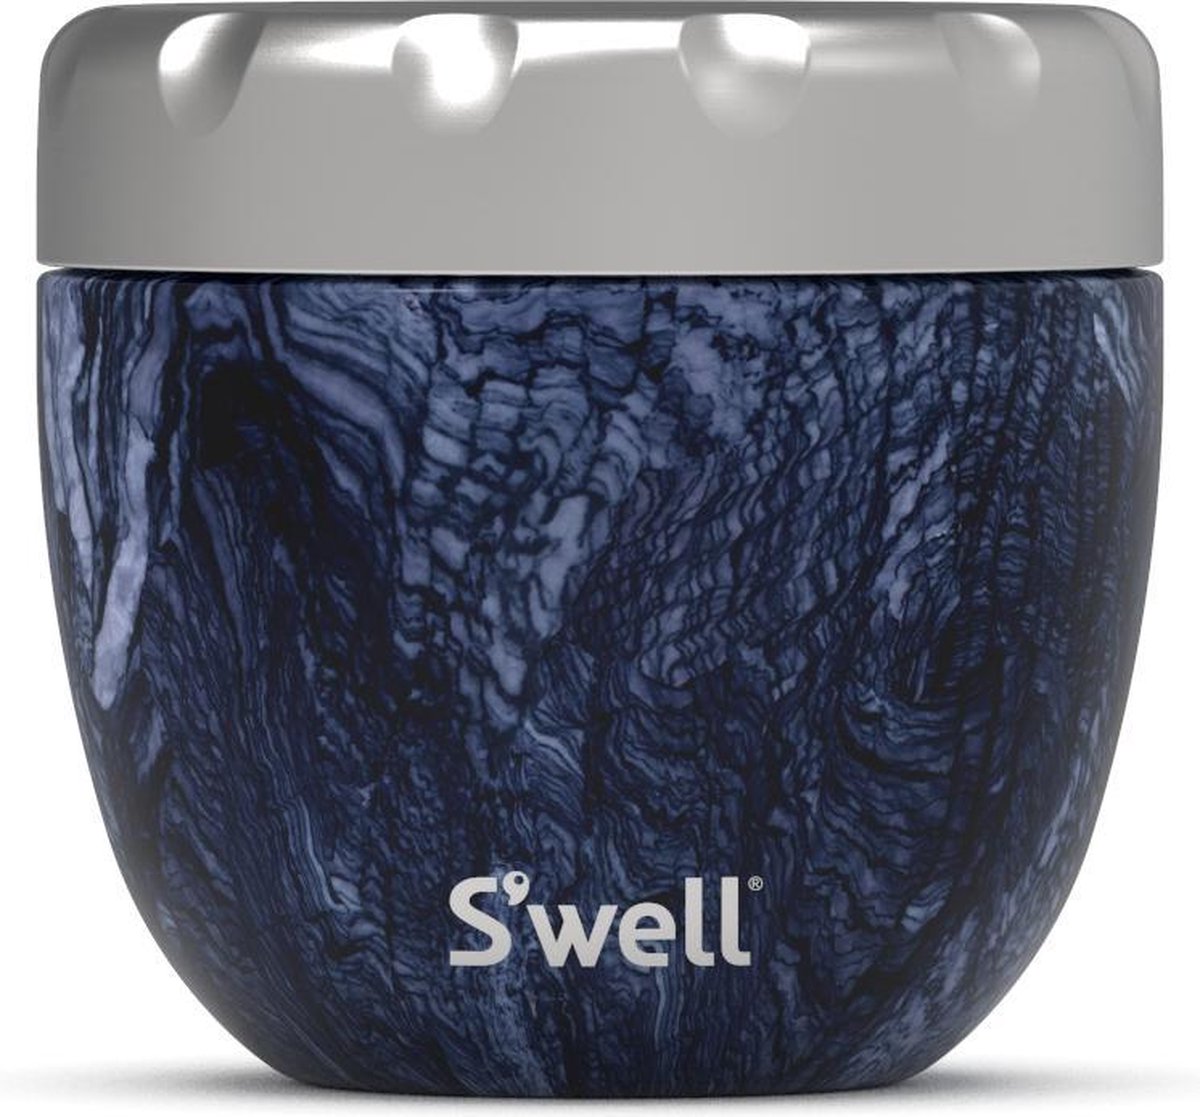 S'well Eats Azurite Marble 635 ml Foodbowl